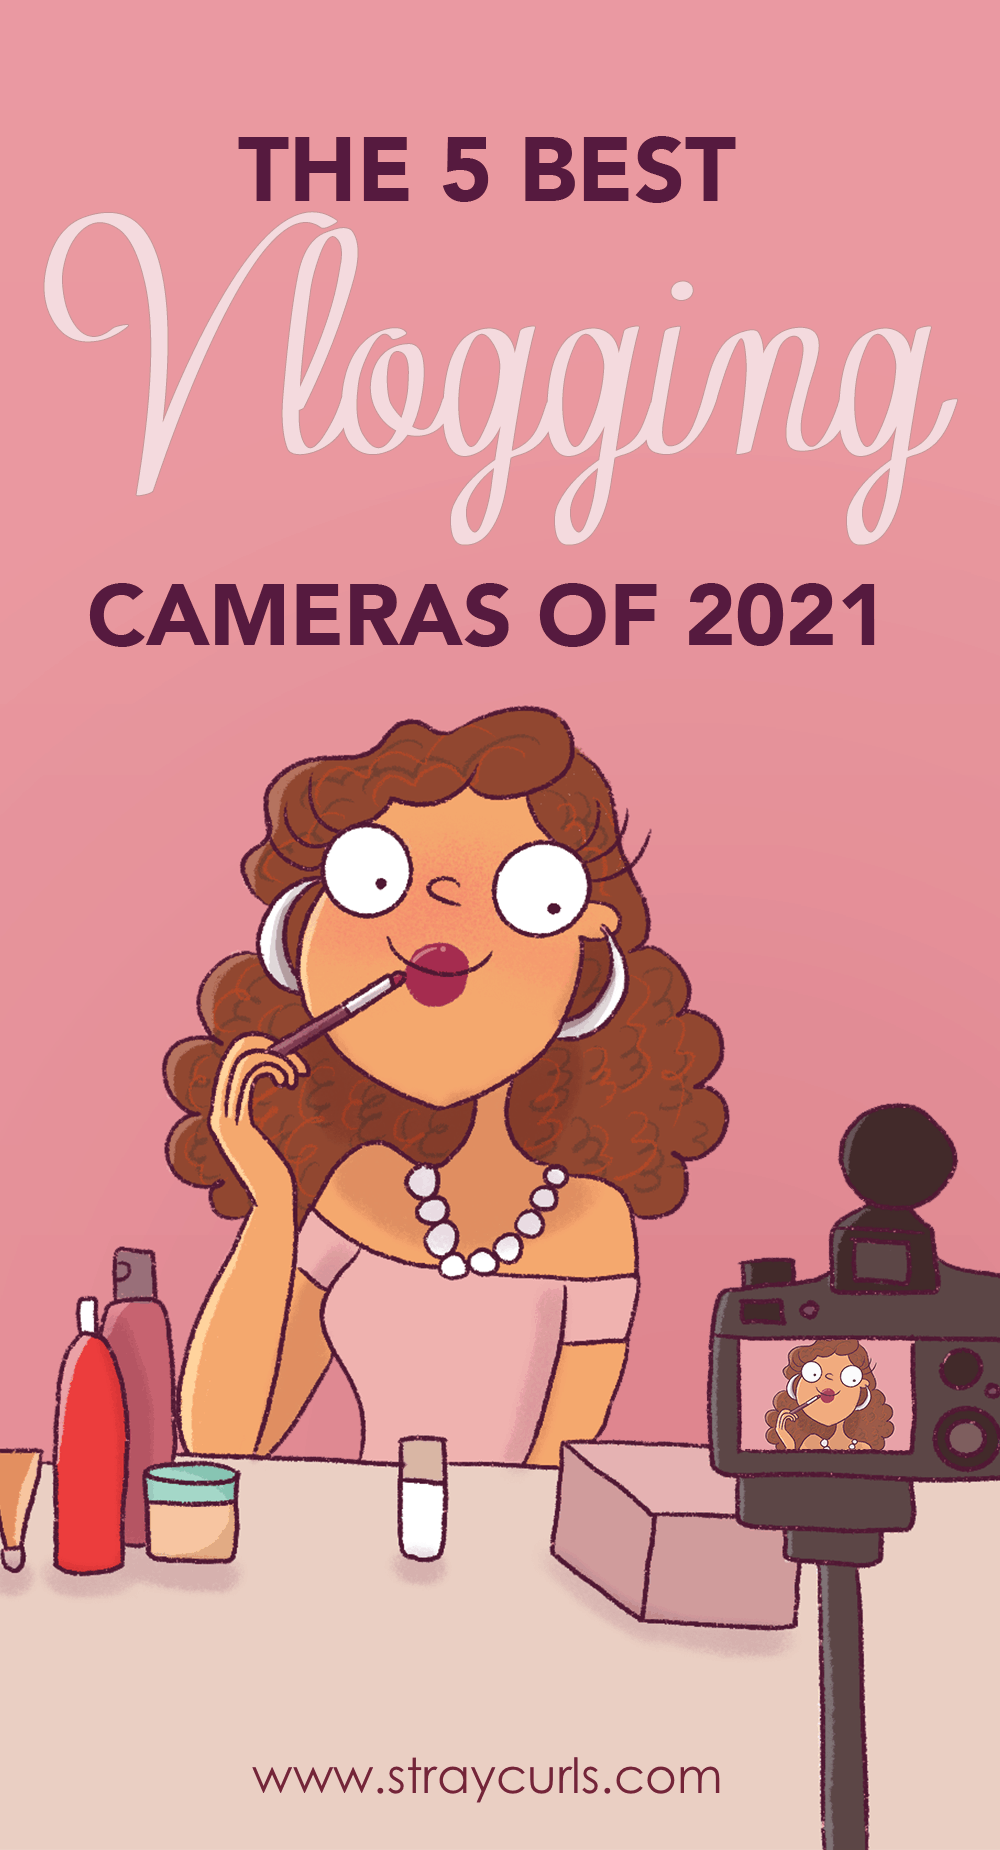 Starting a vlog in 2021 can be the best thing you do for your blog and business. Learn how to pick the best camera for vlogging in 2019. The best cameras for vlogging of 2019 can actually help you get more traffic and views!